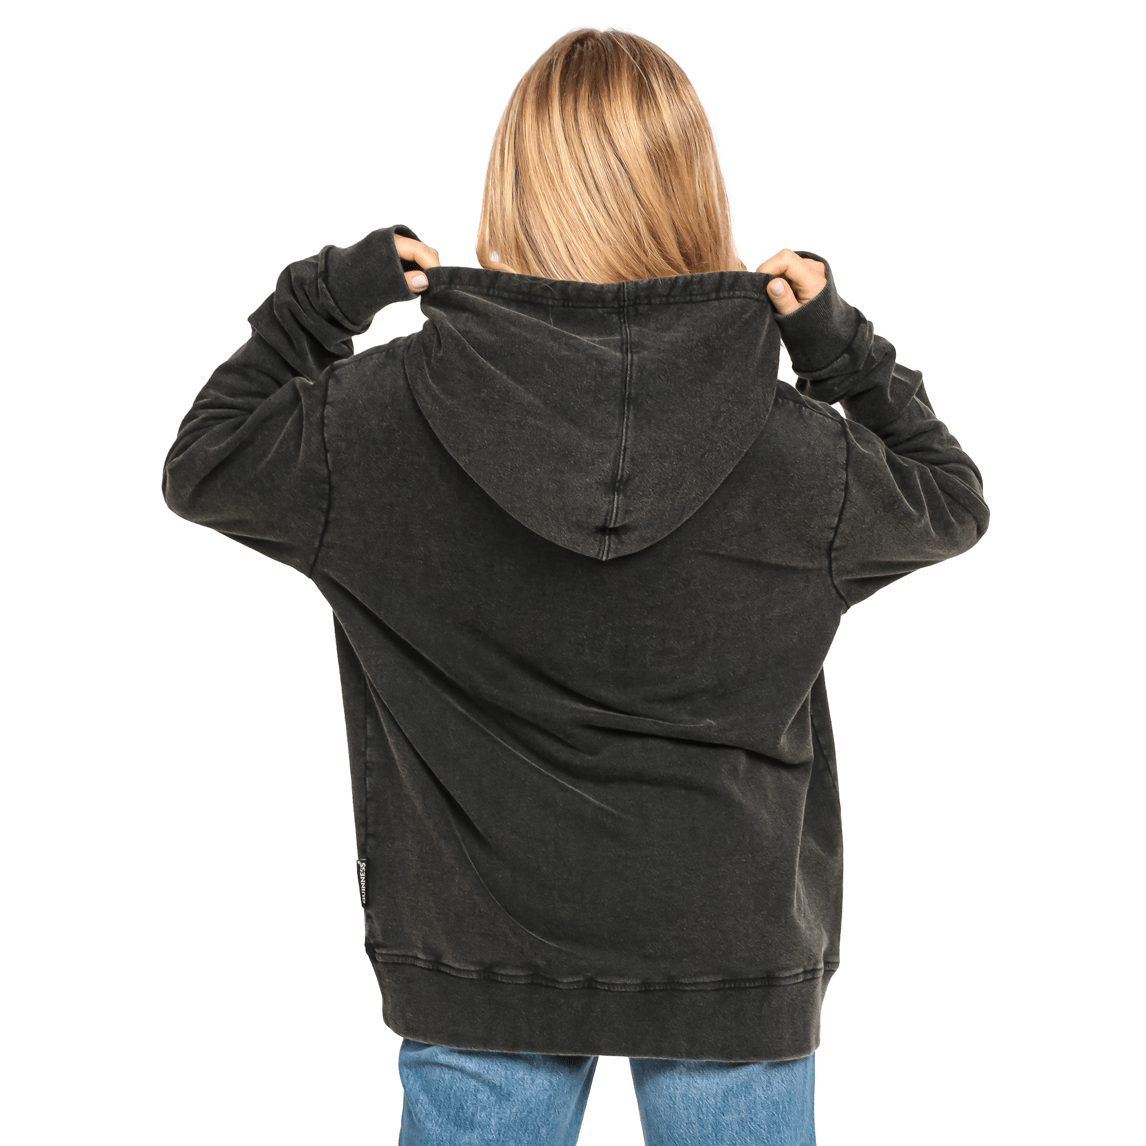 The back view of a woman wearing a Guinness Premium Label Toucan Hoodie.